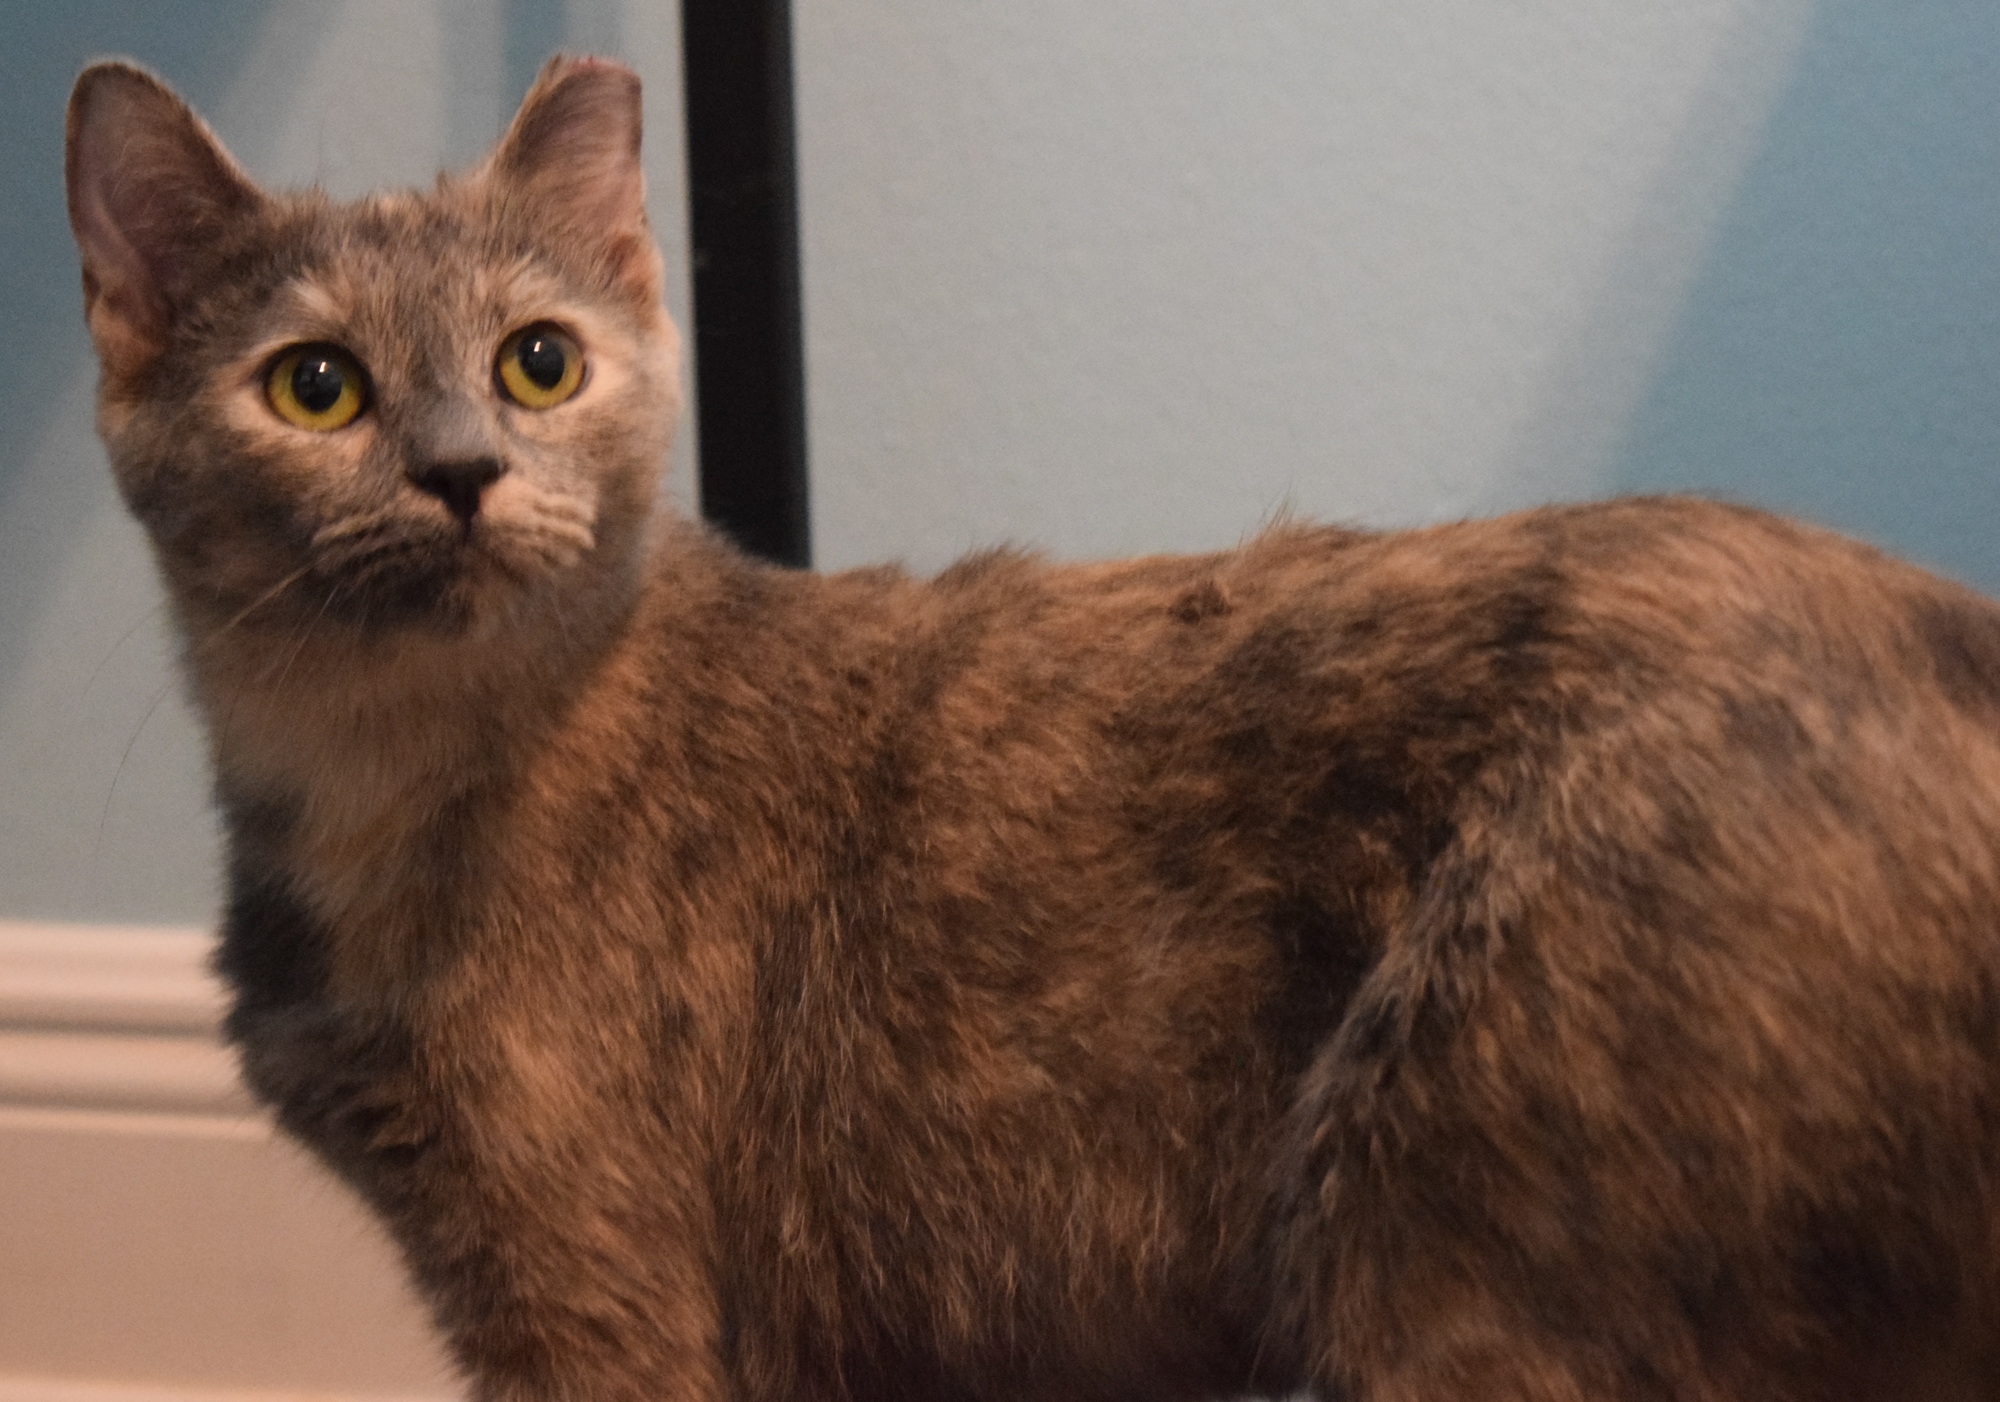 Pumpkin would love to find a new home. (Photo by Jay Heater)